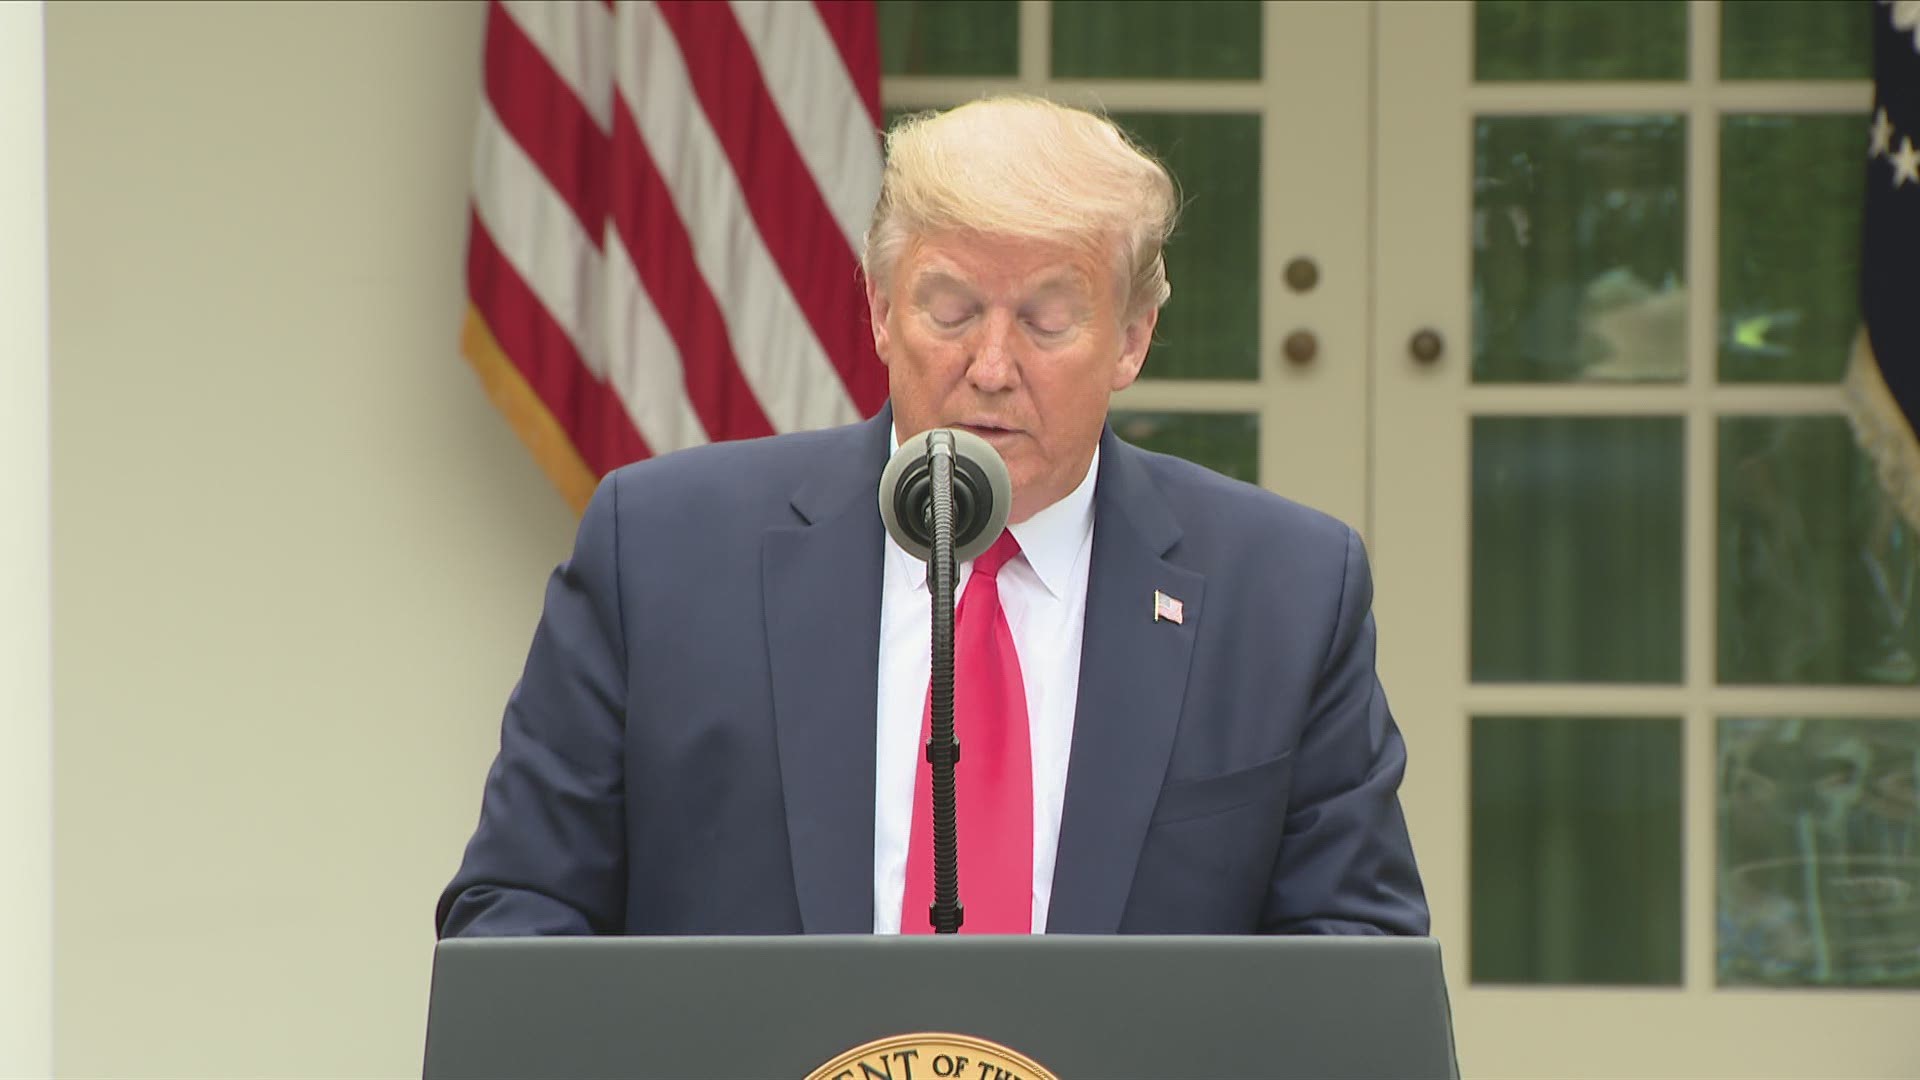 President Trump said Tuesday's he's instructed his administration to stop funding for the W.H.O. while a review over its handling of coronavirus is undertaken.